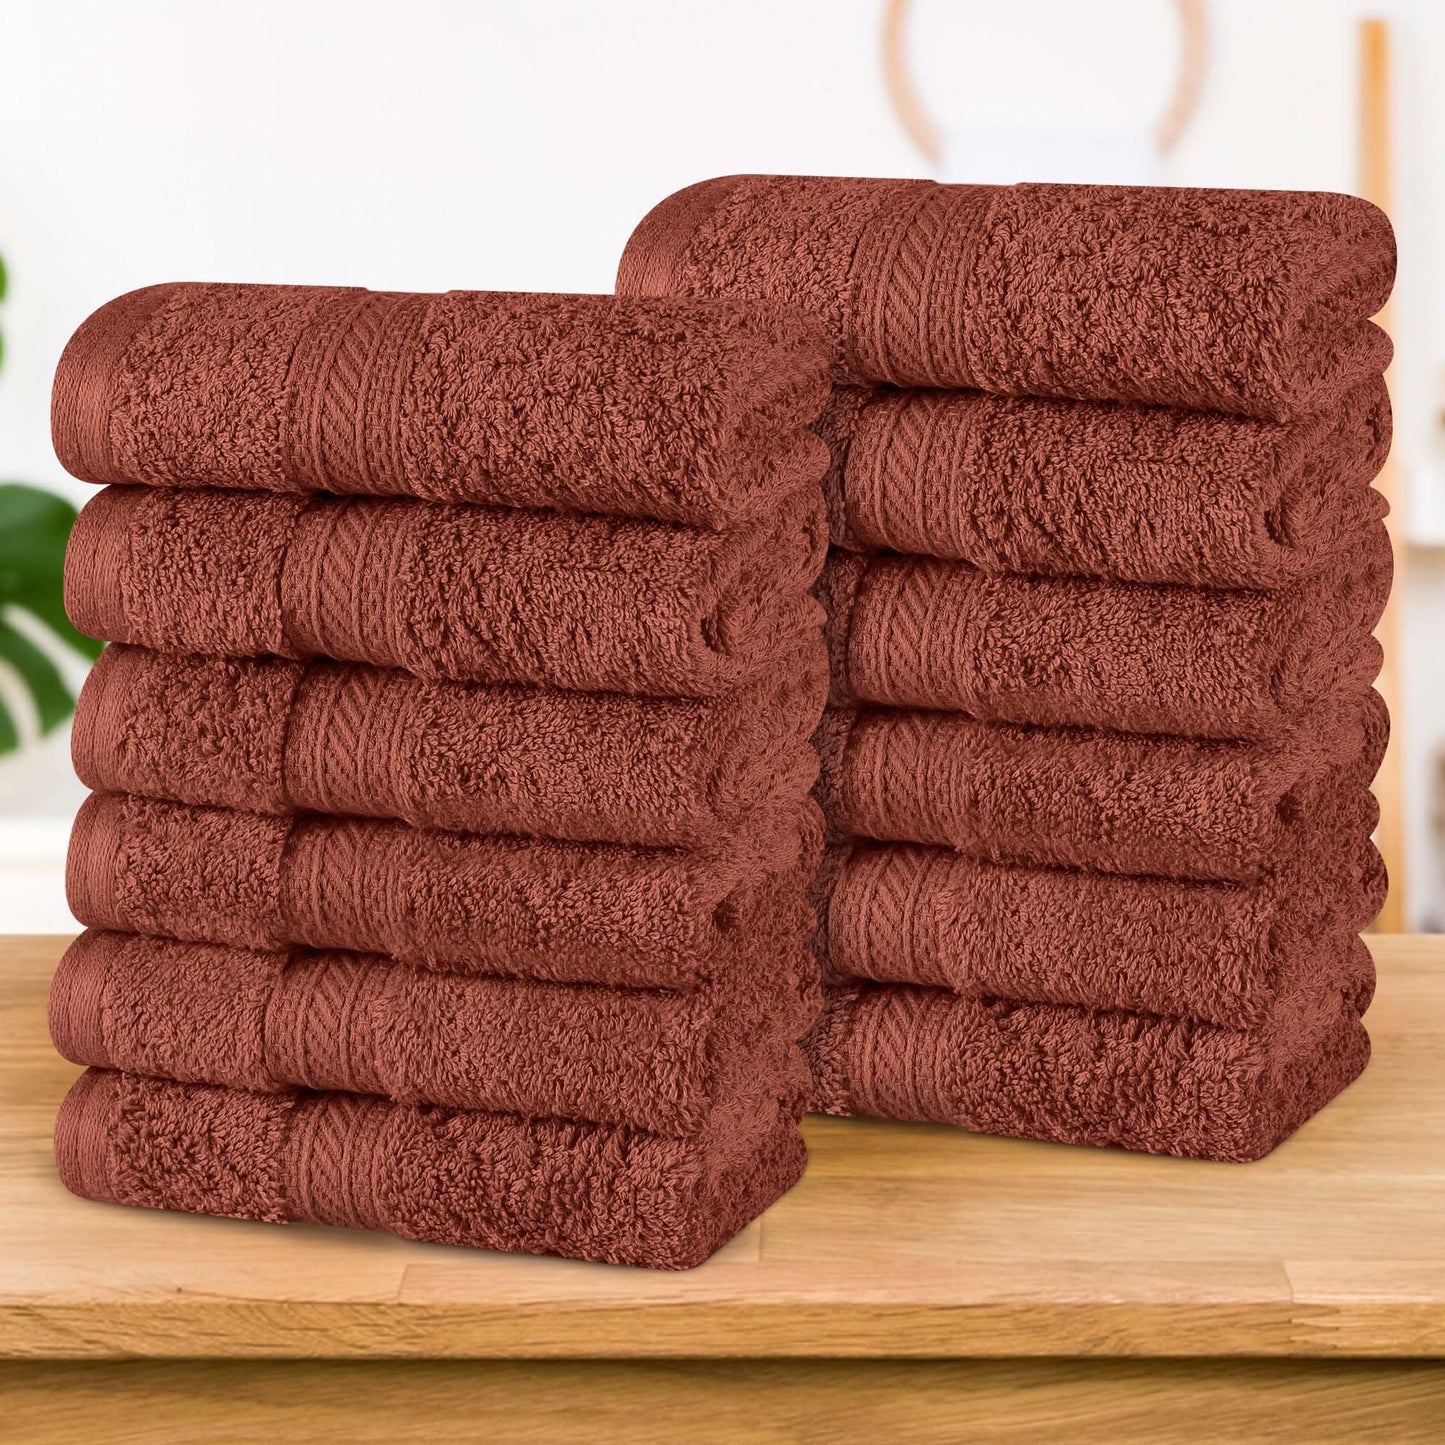 Superior Cotton Face Towels/Washcloth Set of 12, Home Essentials, Quick Dry, Luxury Bathroom Accessories, Basic Towels, Spa, Salon, Hotel, Resort, Thick, Ultra-Plush, Highly Absorbent, Hot Chocolate